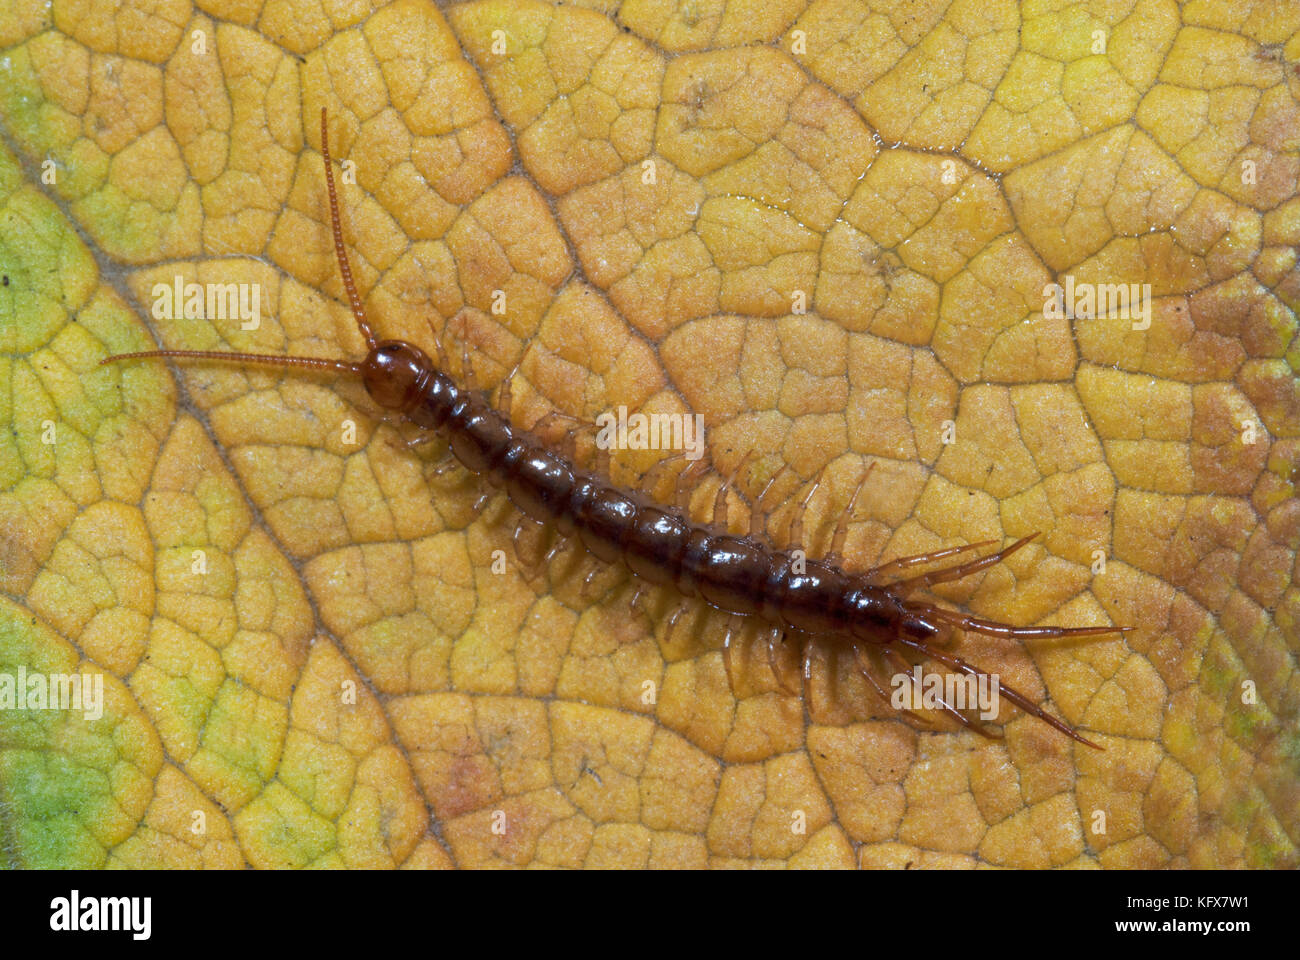 Common Centipede, Lithobius species, on leaf in garden, showing head, segmented body, antennae and legs Stock Photo